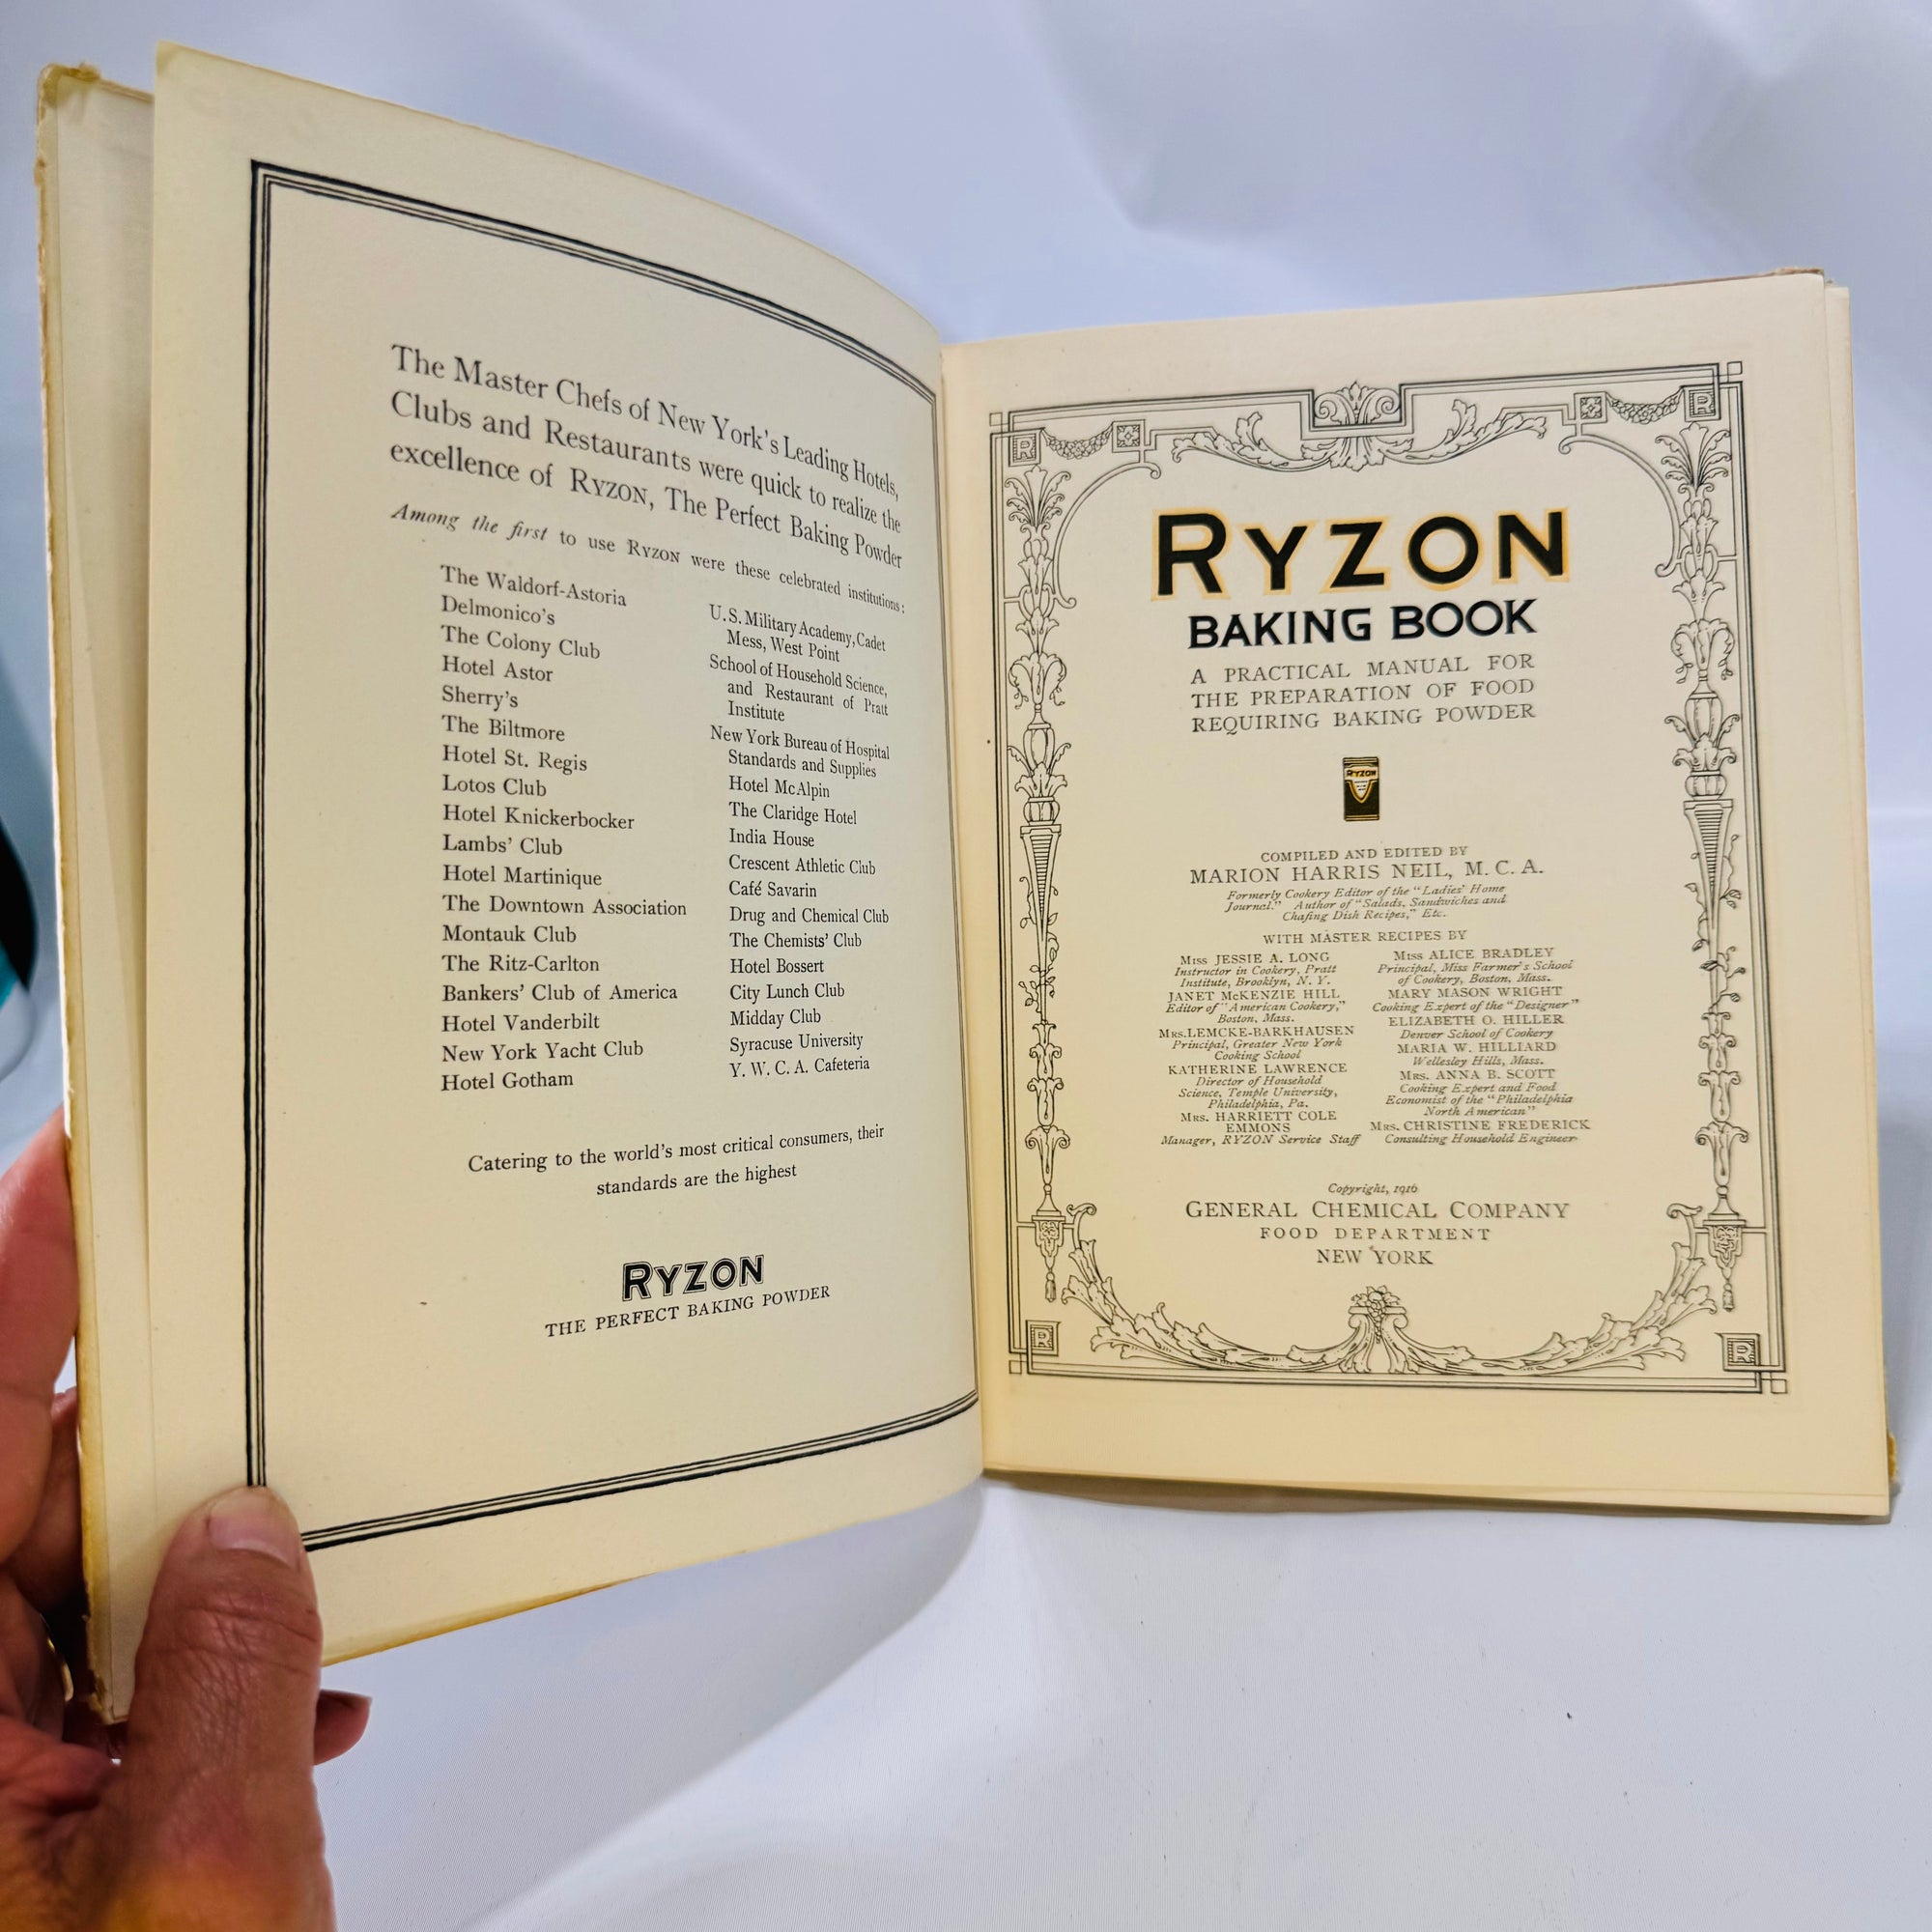 Ryzon Baking Book by Marion Harris Neil 1916 General Chemical Company